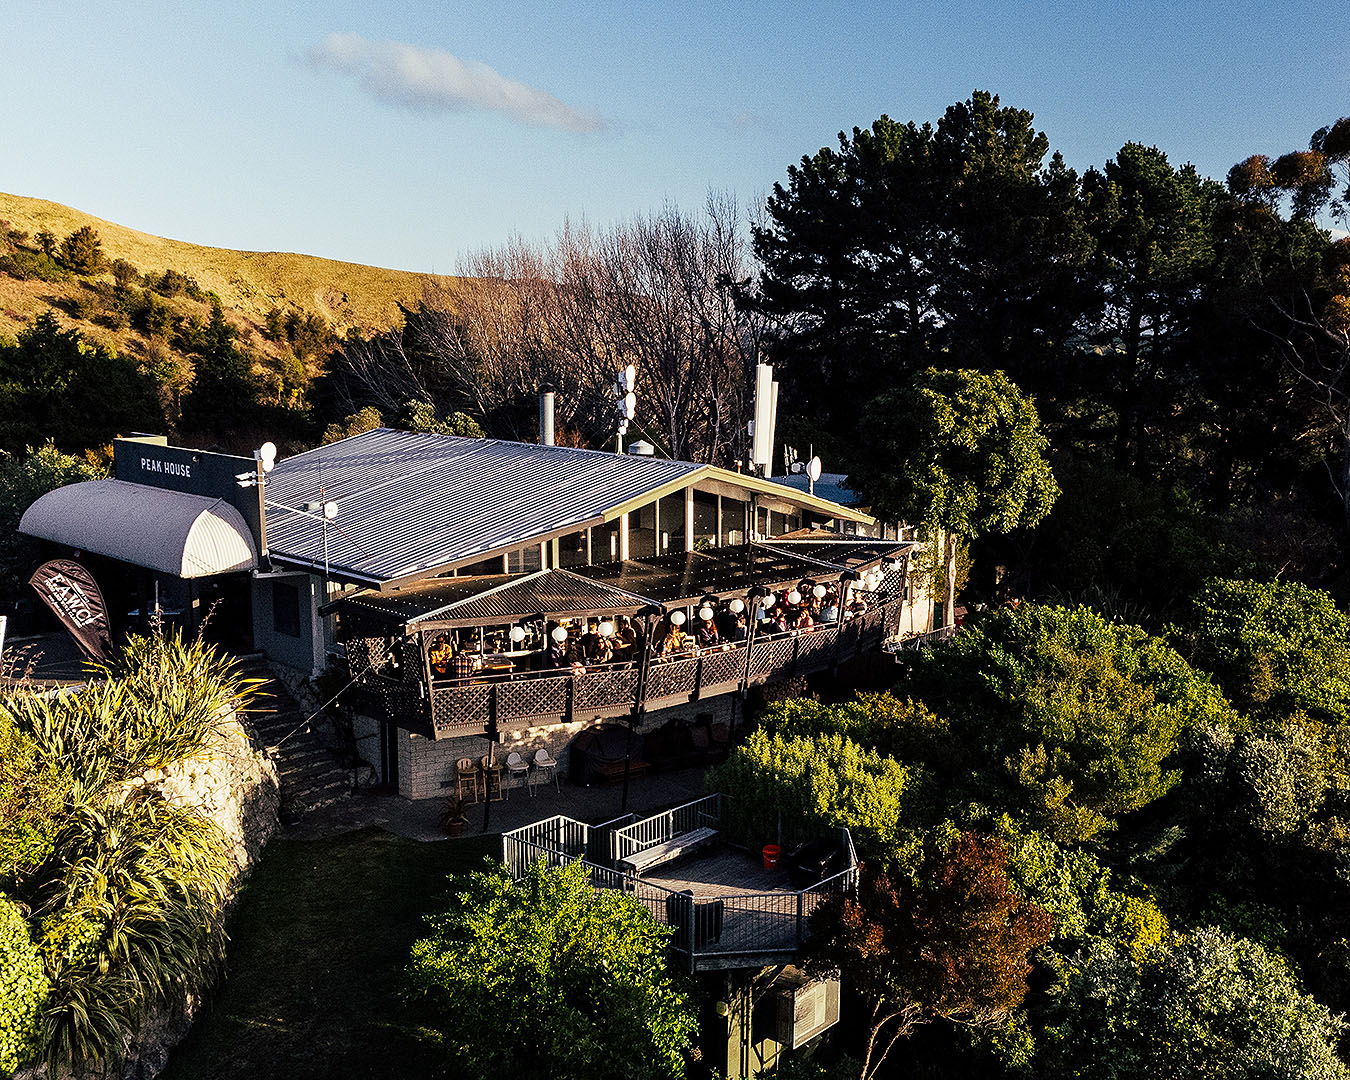 Peak House, one of the best cafes in Havelock North sits pretty at the top of Te Mata Peak.